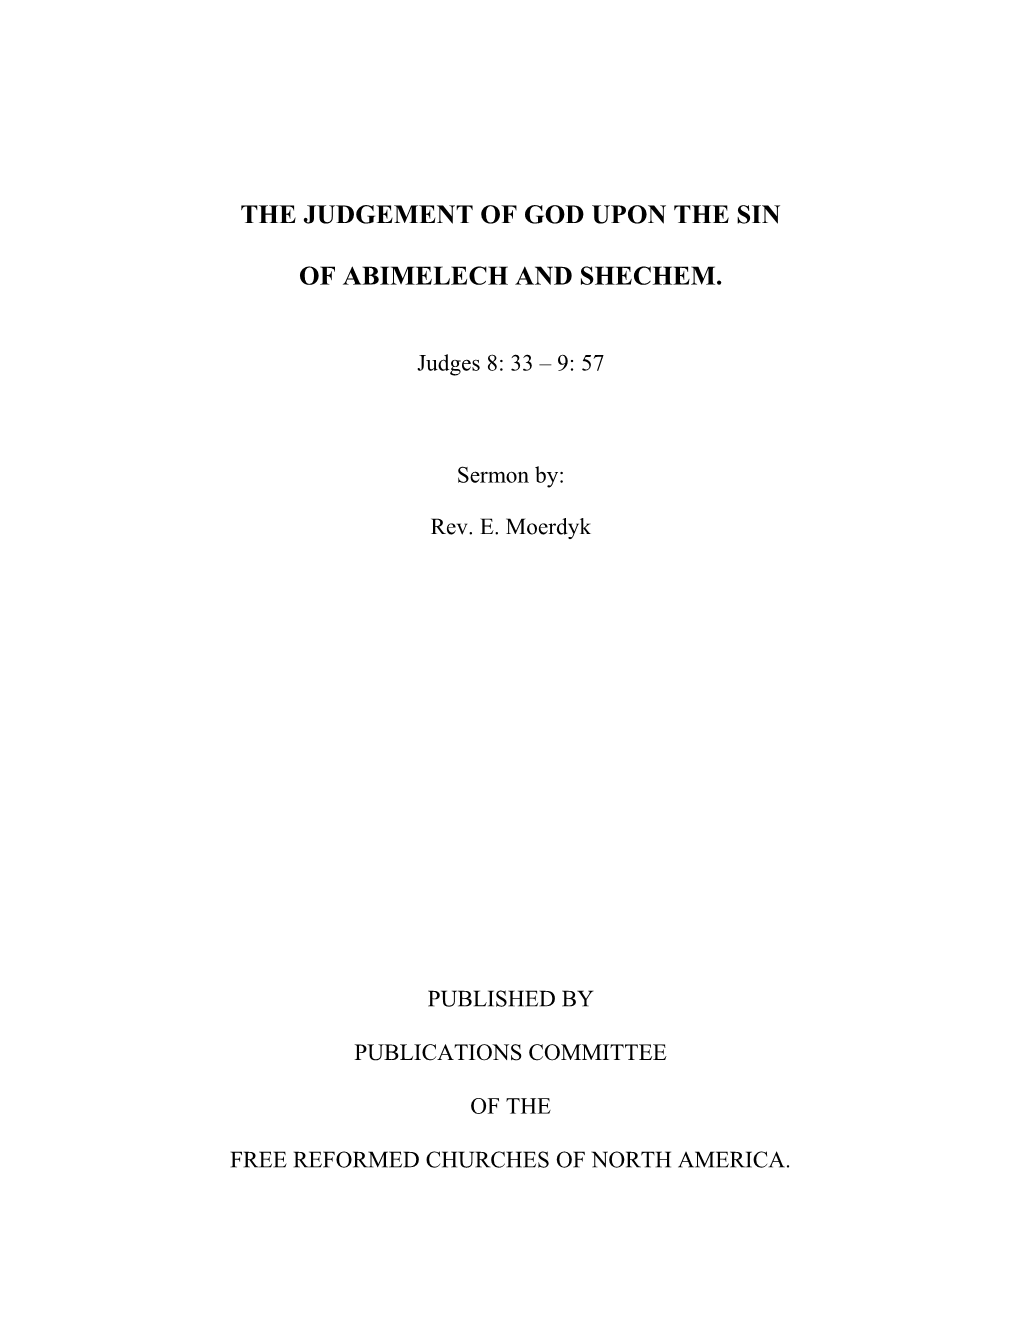 The Judgement of God Upon the Sin